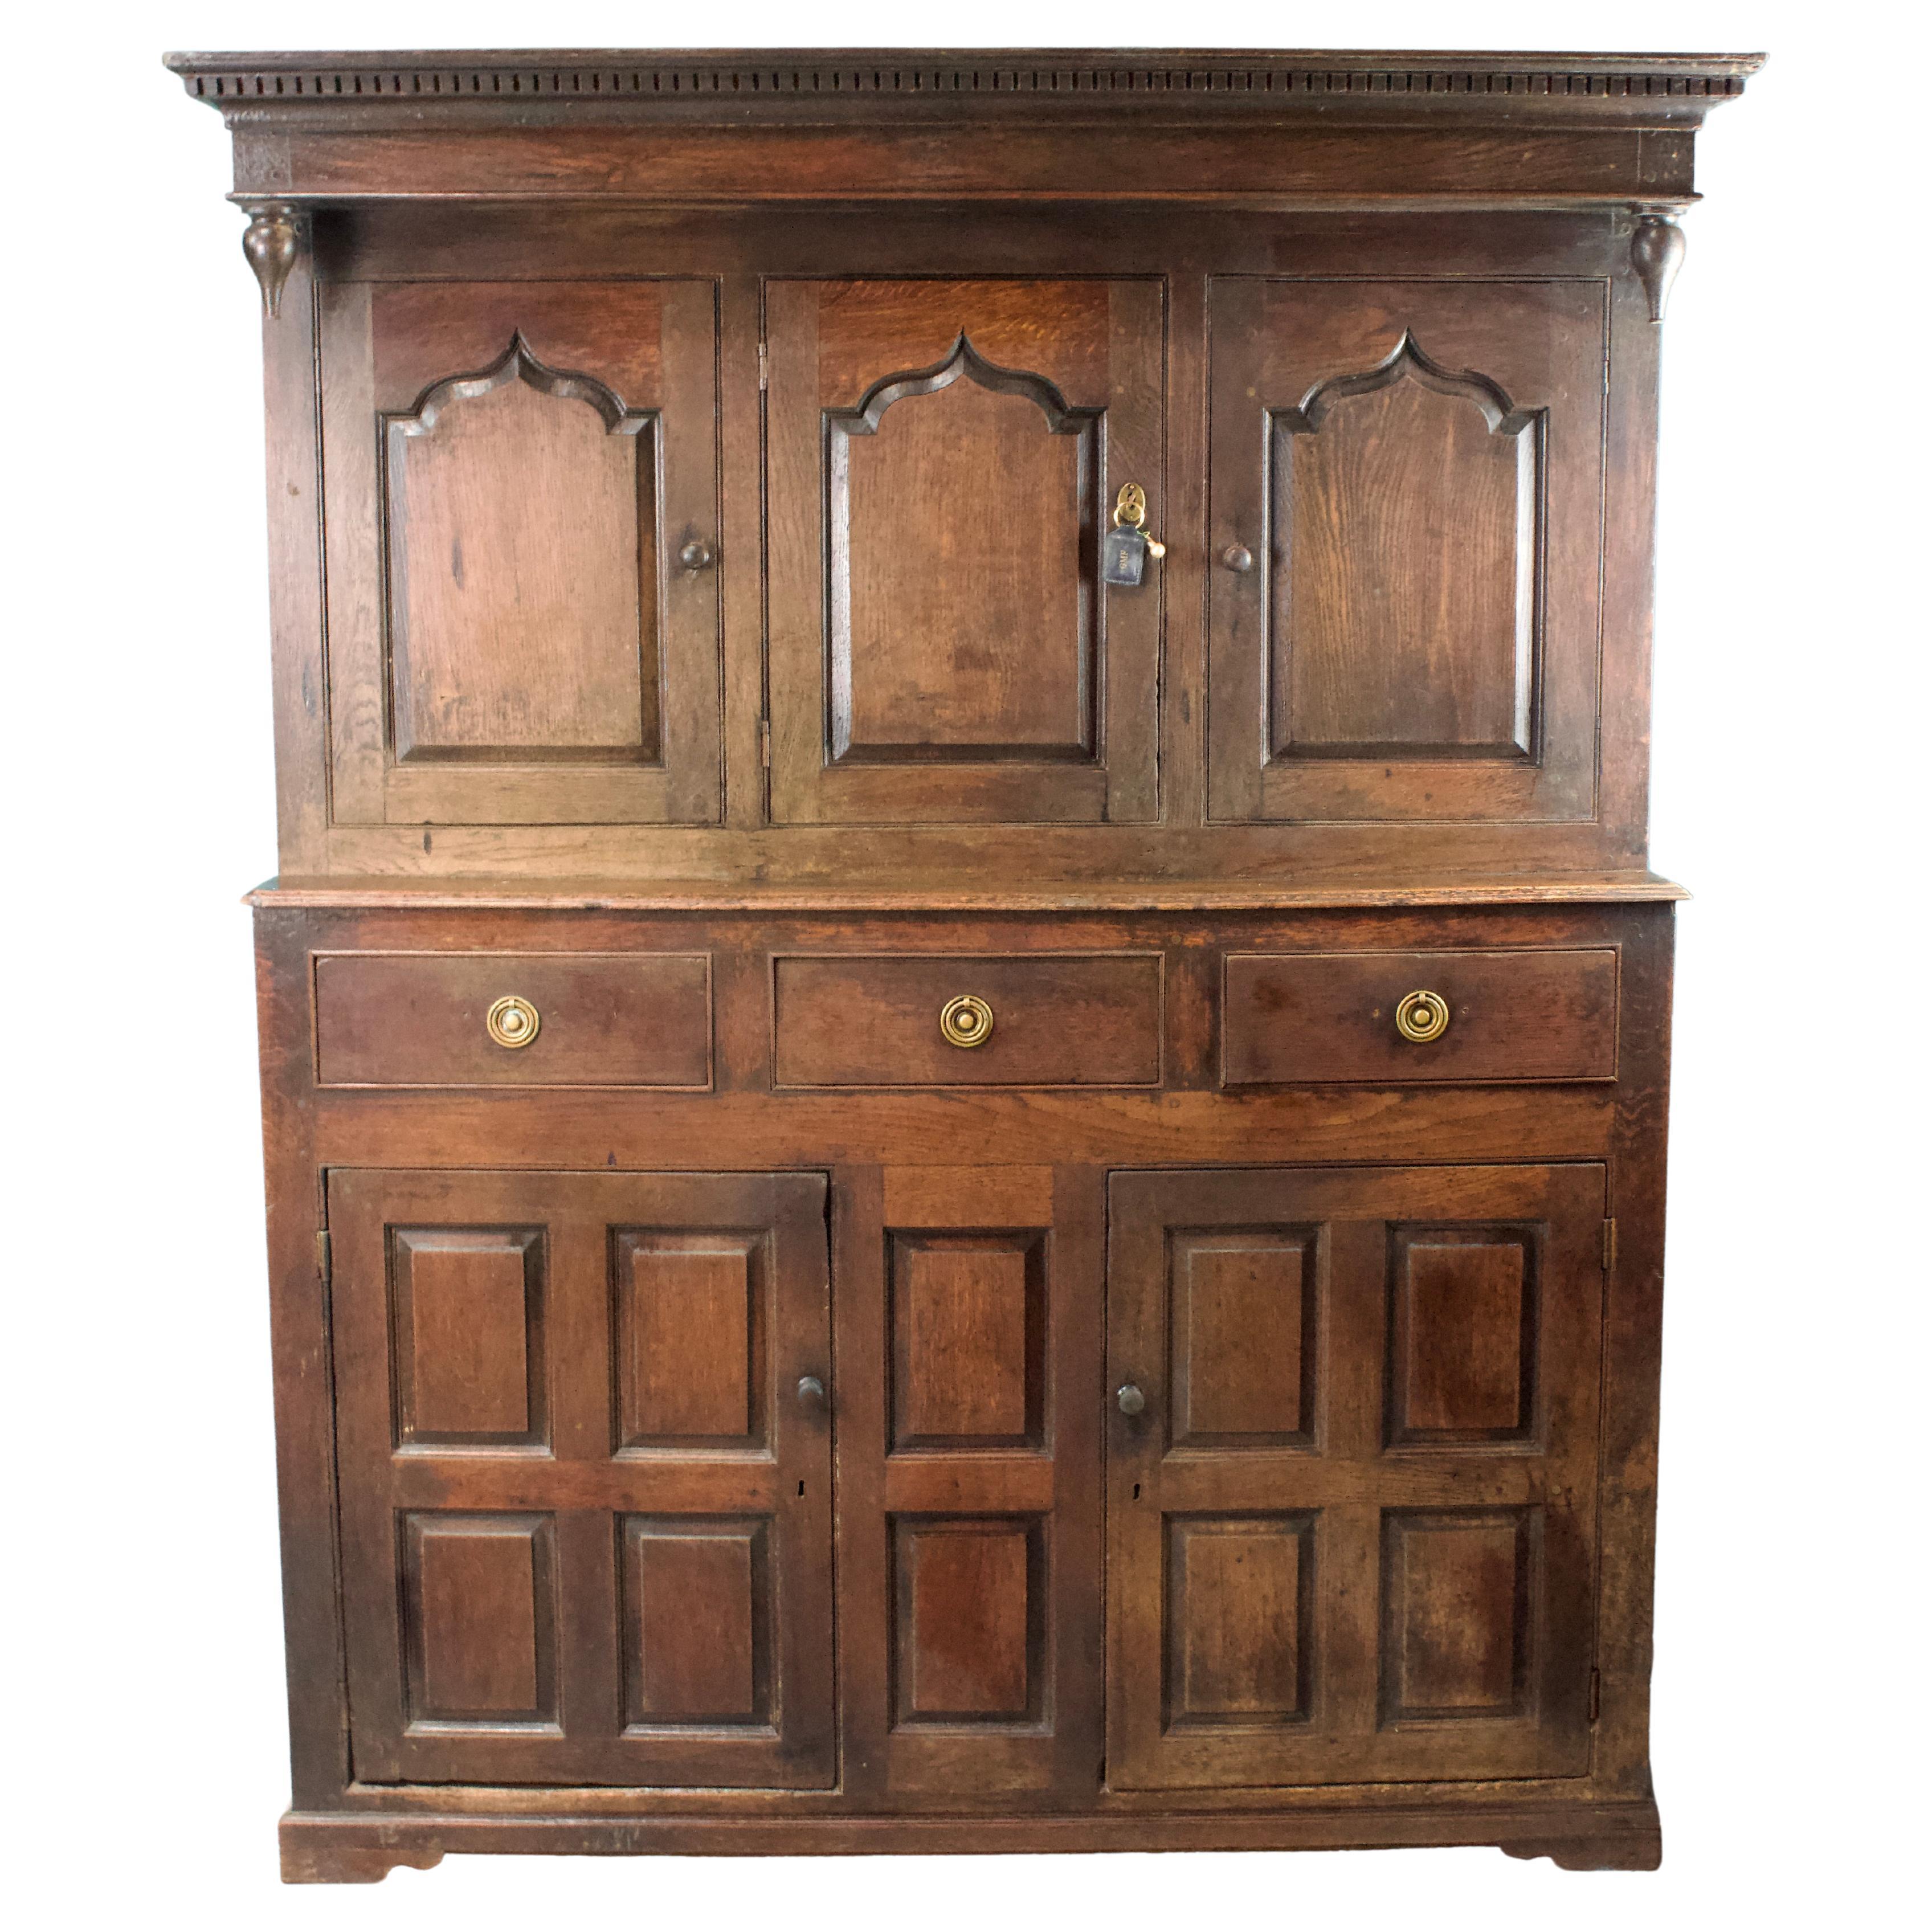 English Welsh Buffet in Oak XVIIIth Century - English antiques - United Kingdom For Sale